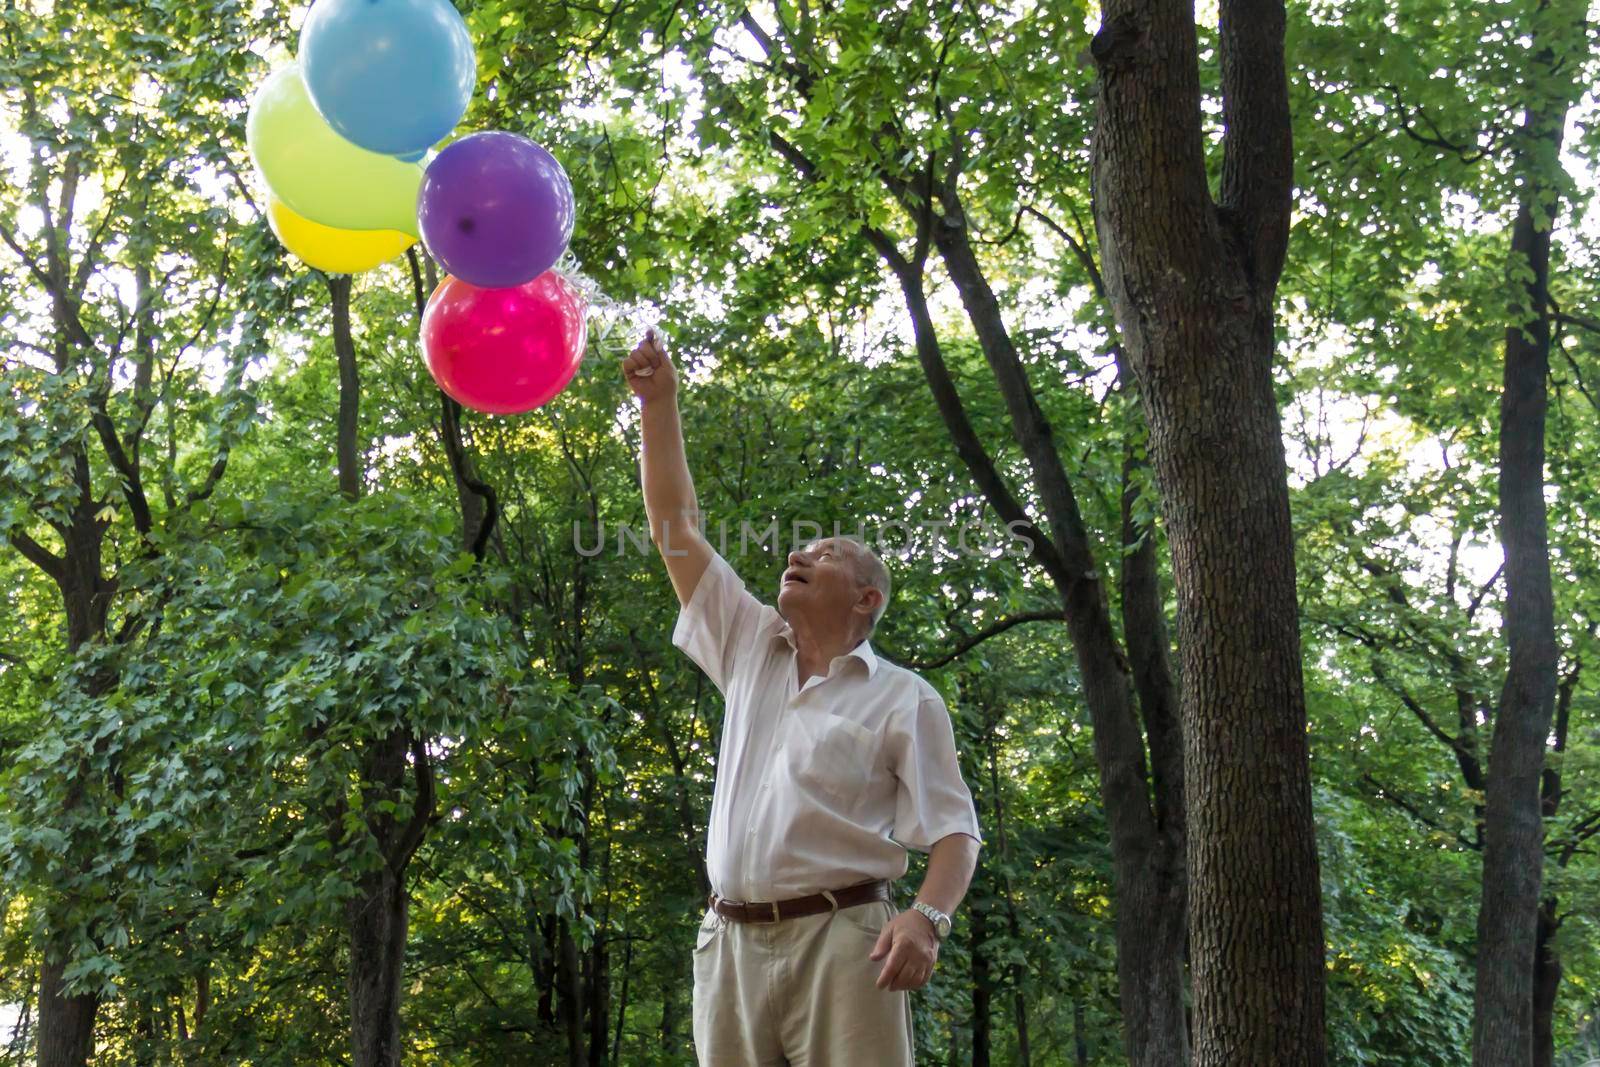 An old man is playing in the park with bright, balloons on his birthday by Alla_Yurtayeva